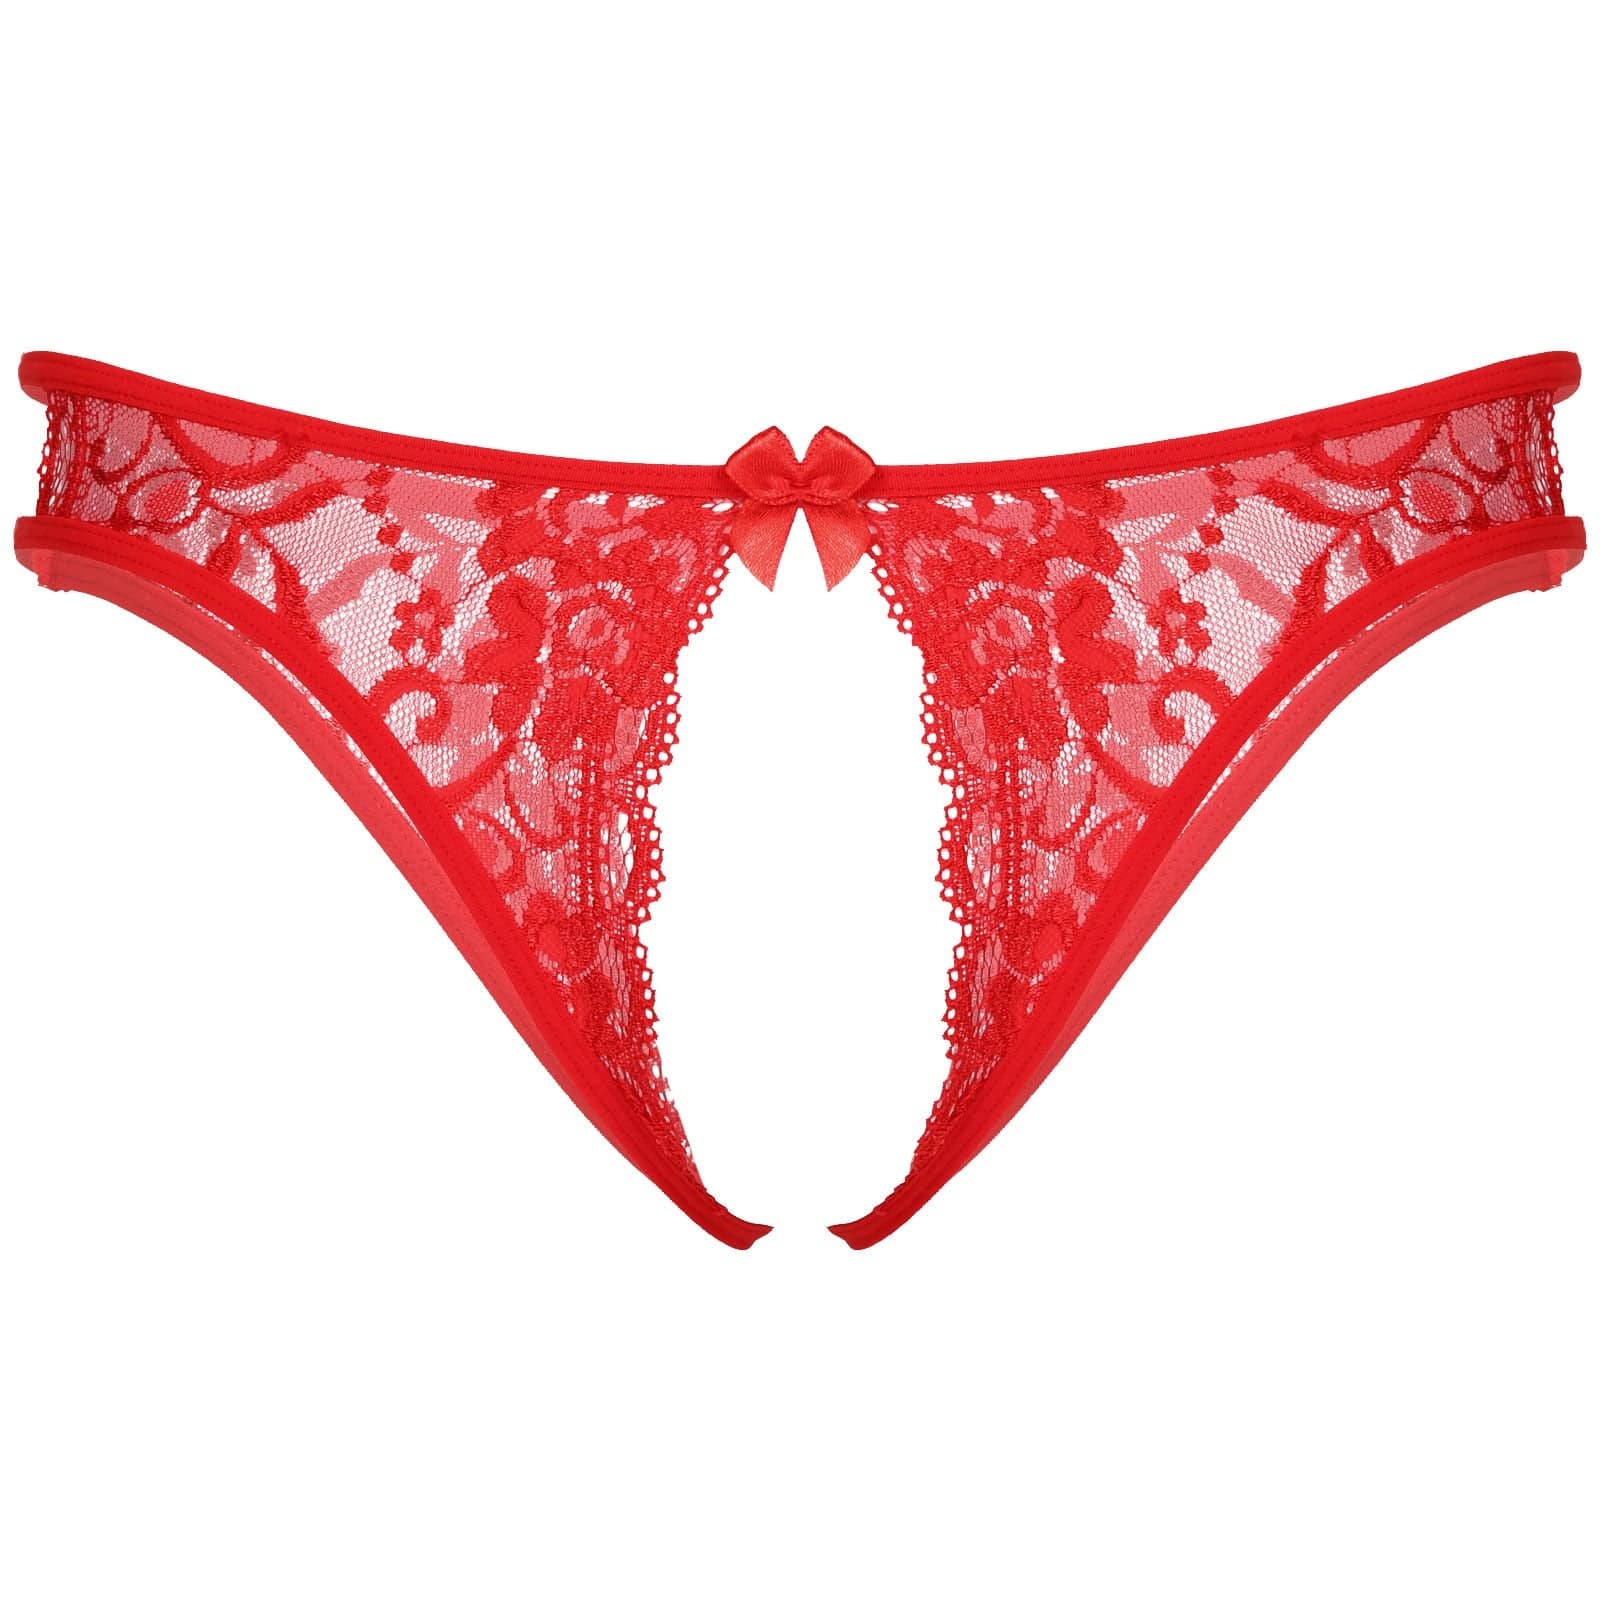 Kinky Cloth Red / One Size Sissy Lingerie Crotchless Panties